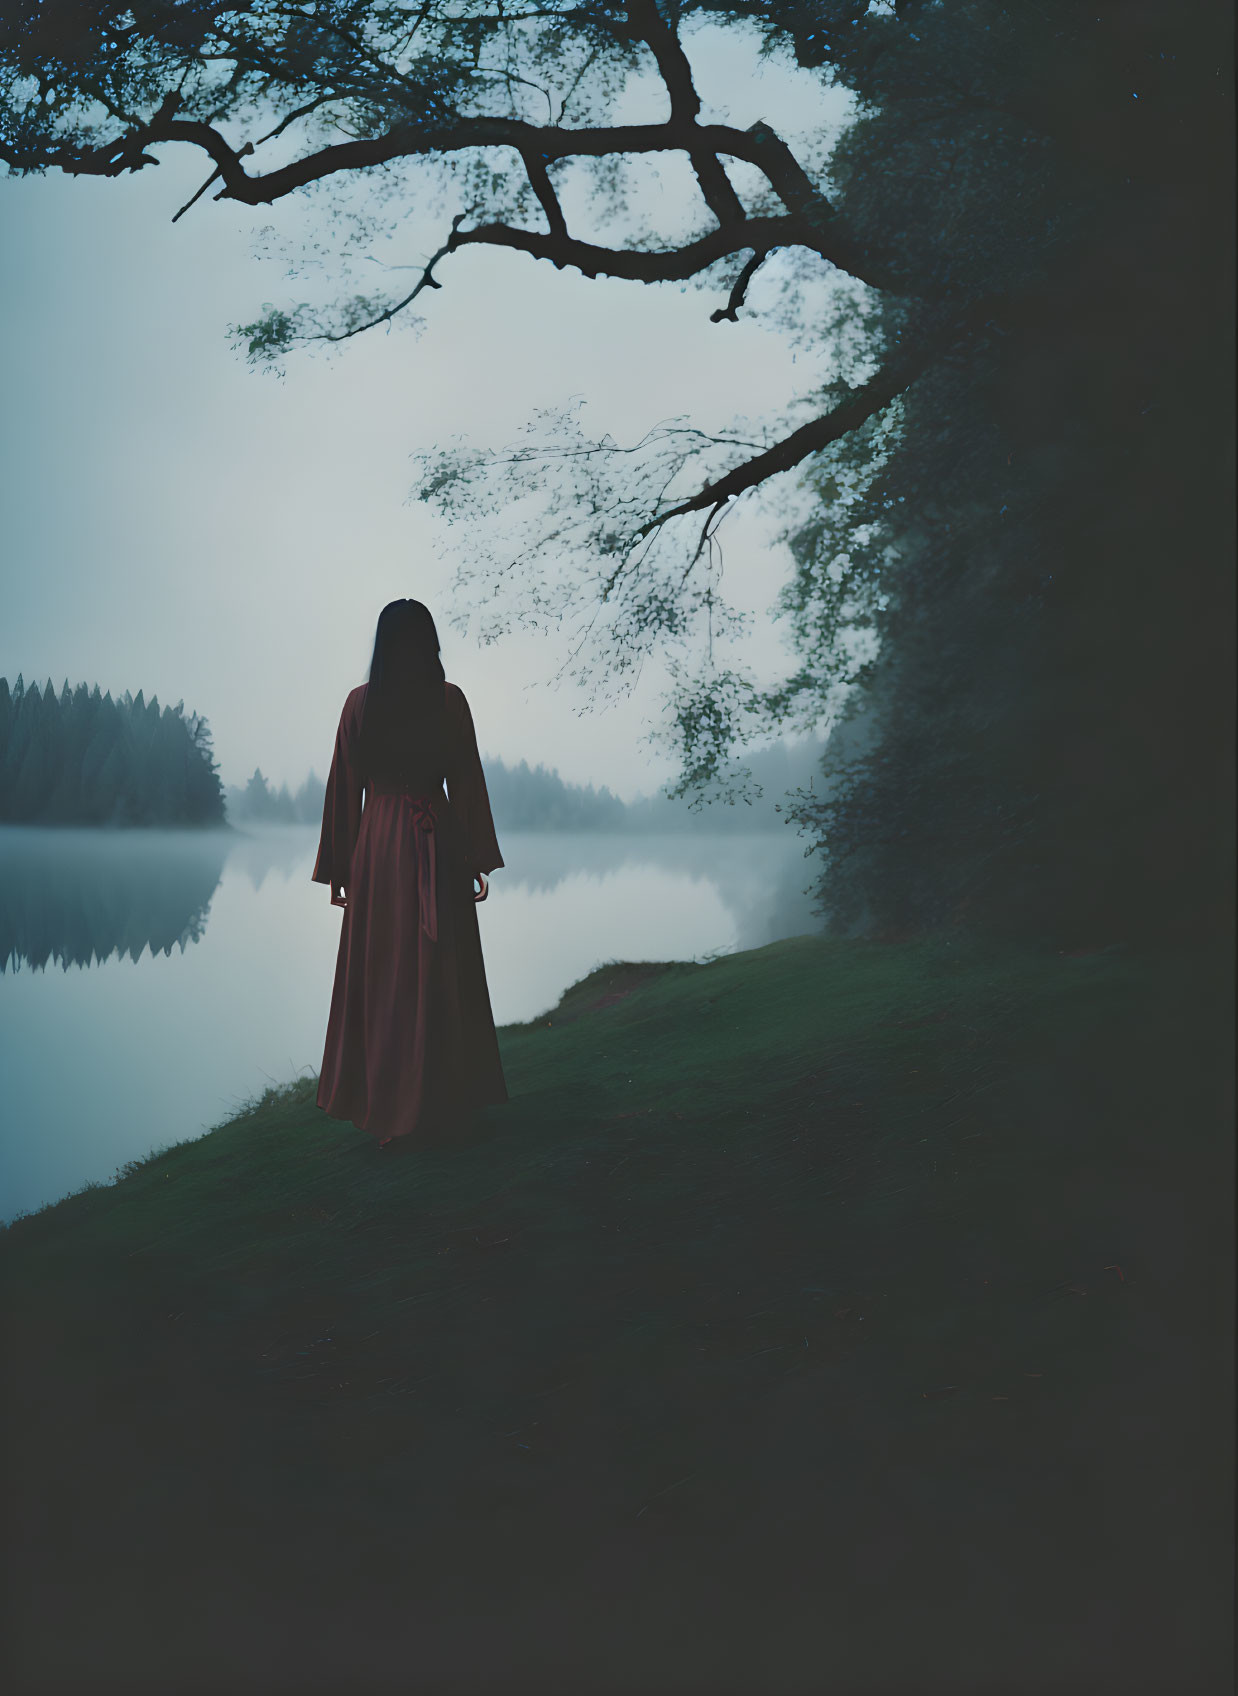 Person in Red Cloak by Serene Lake at Twilight